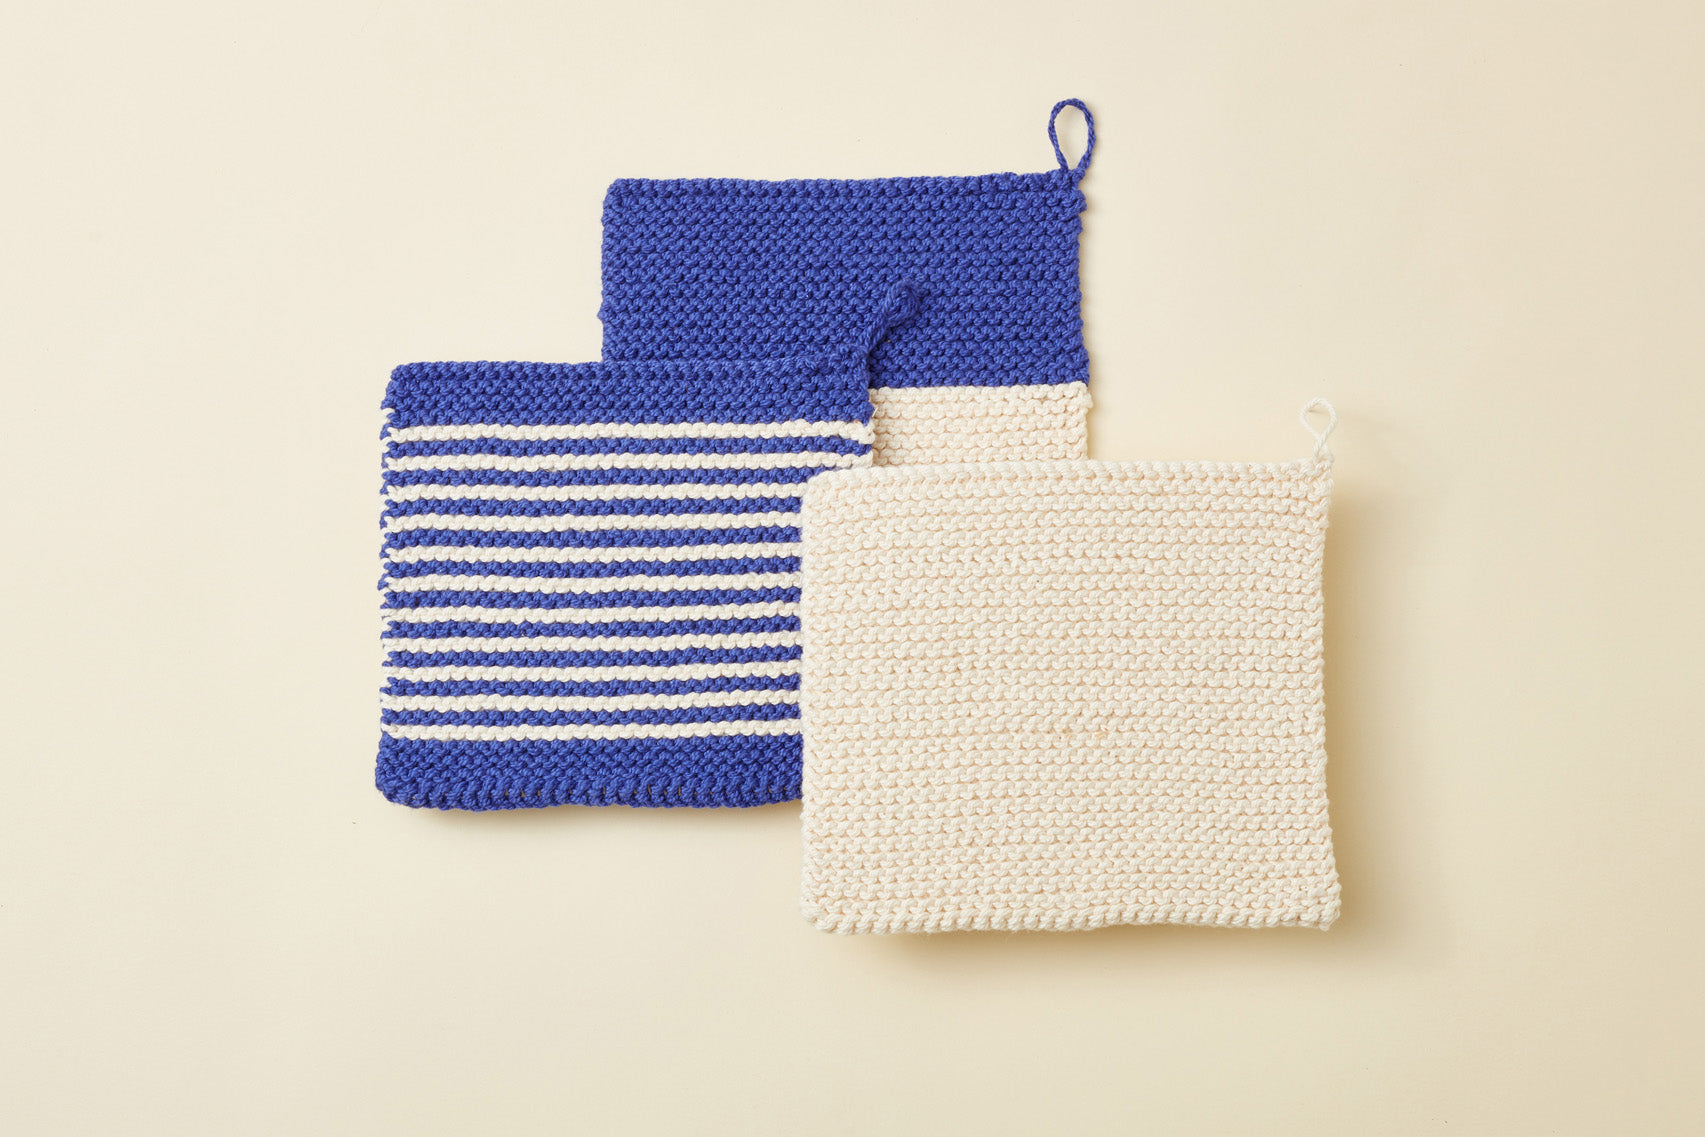 Discover Knitting - Kit & Video Learning With 3 Projects By Grace Casey  Gouin